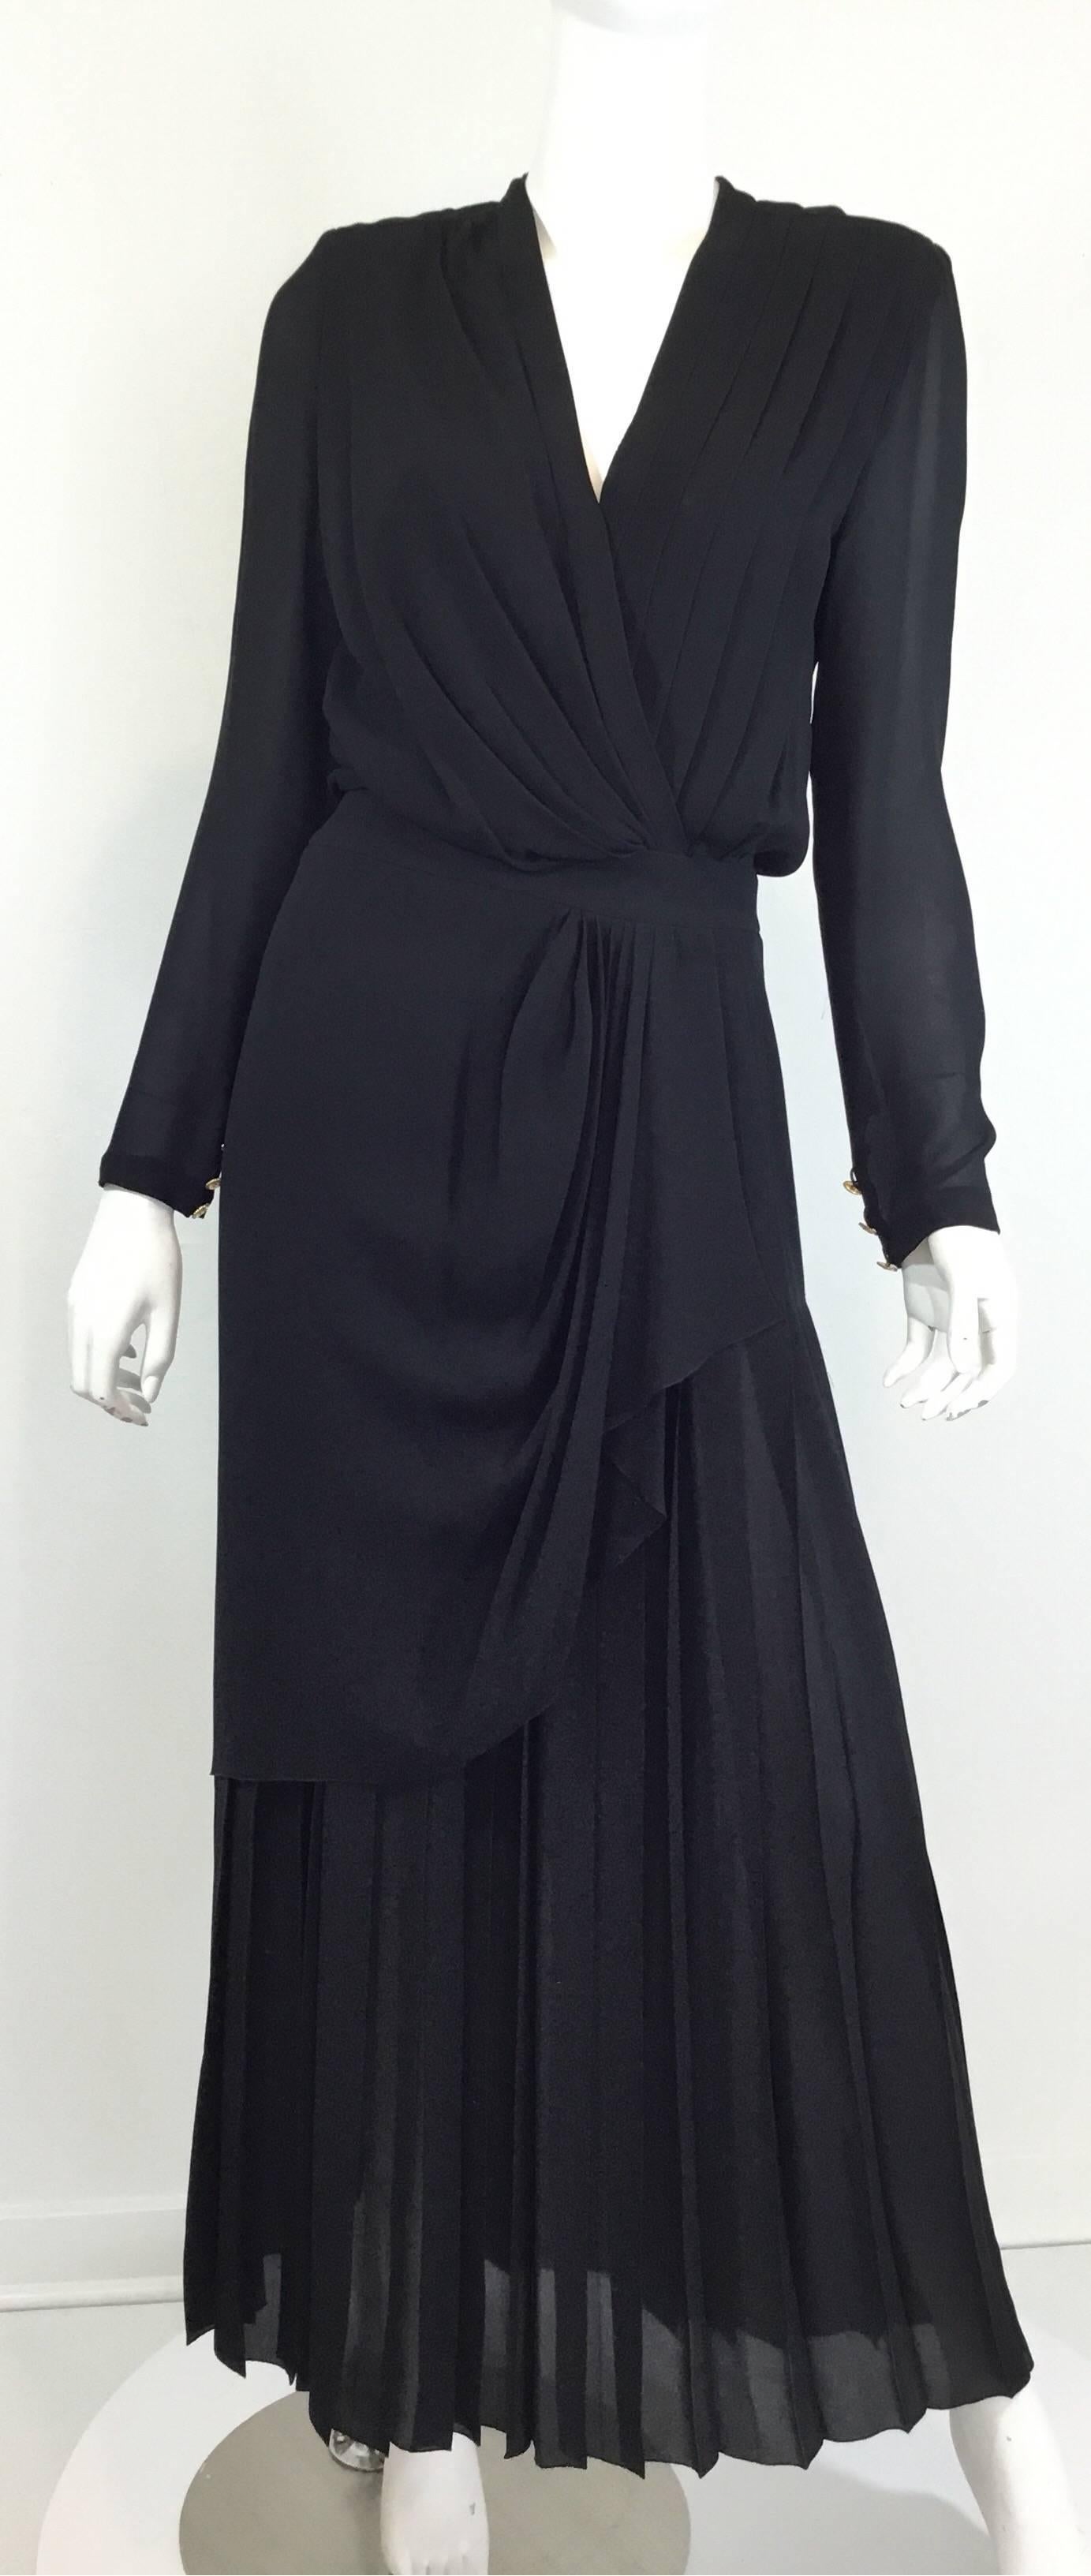 Vintage Chanel dress featured in black chiffon, crossover/surplice neckline with a pleated detail, a beautifully draped skirt with a zipper and hook fastening at the back, button closures at the back of the neck as well, gold buttons on sleeves, and